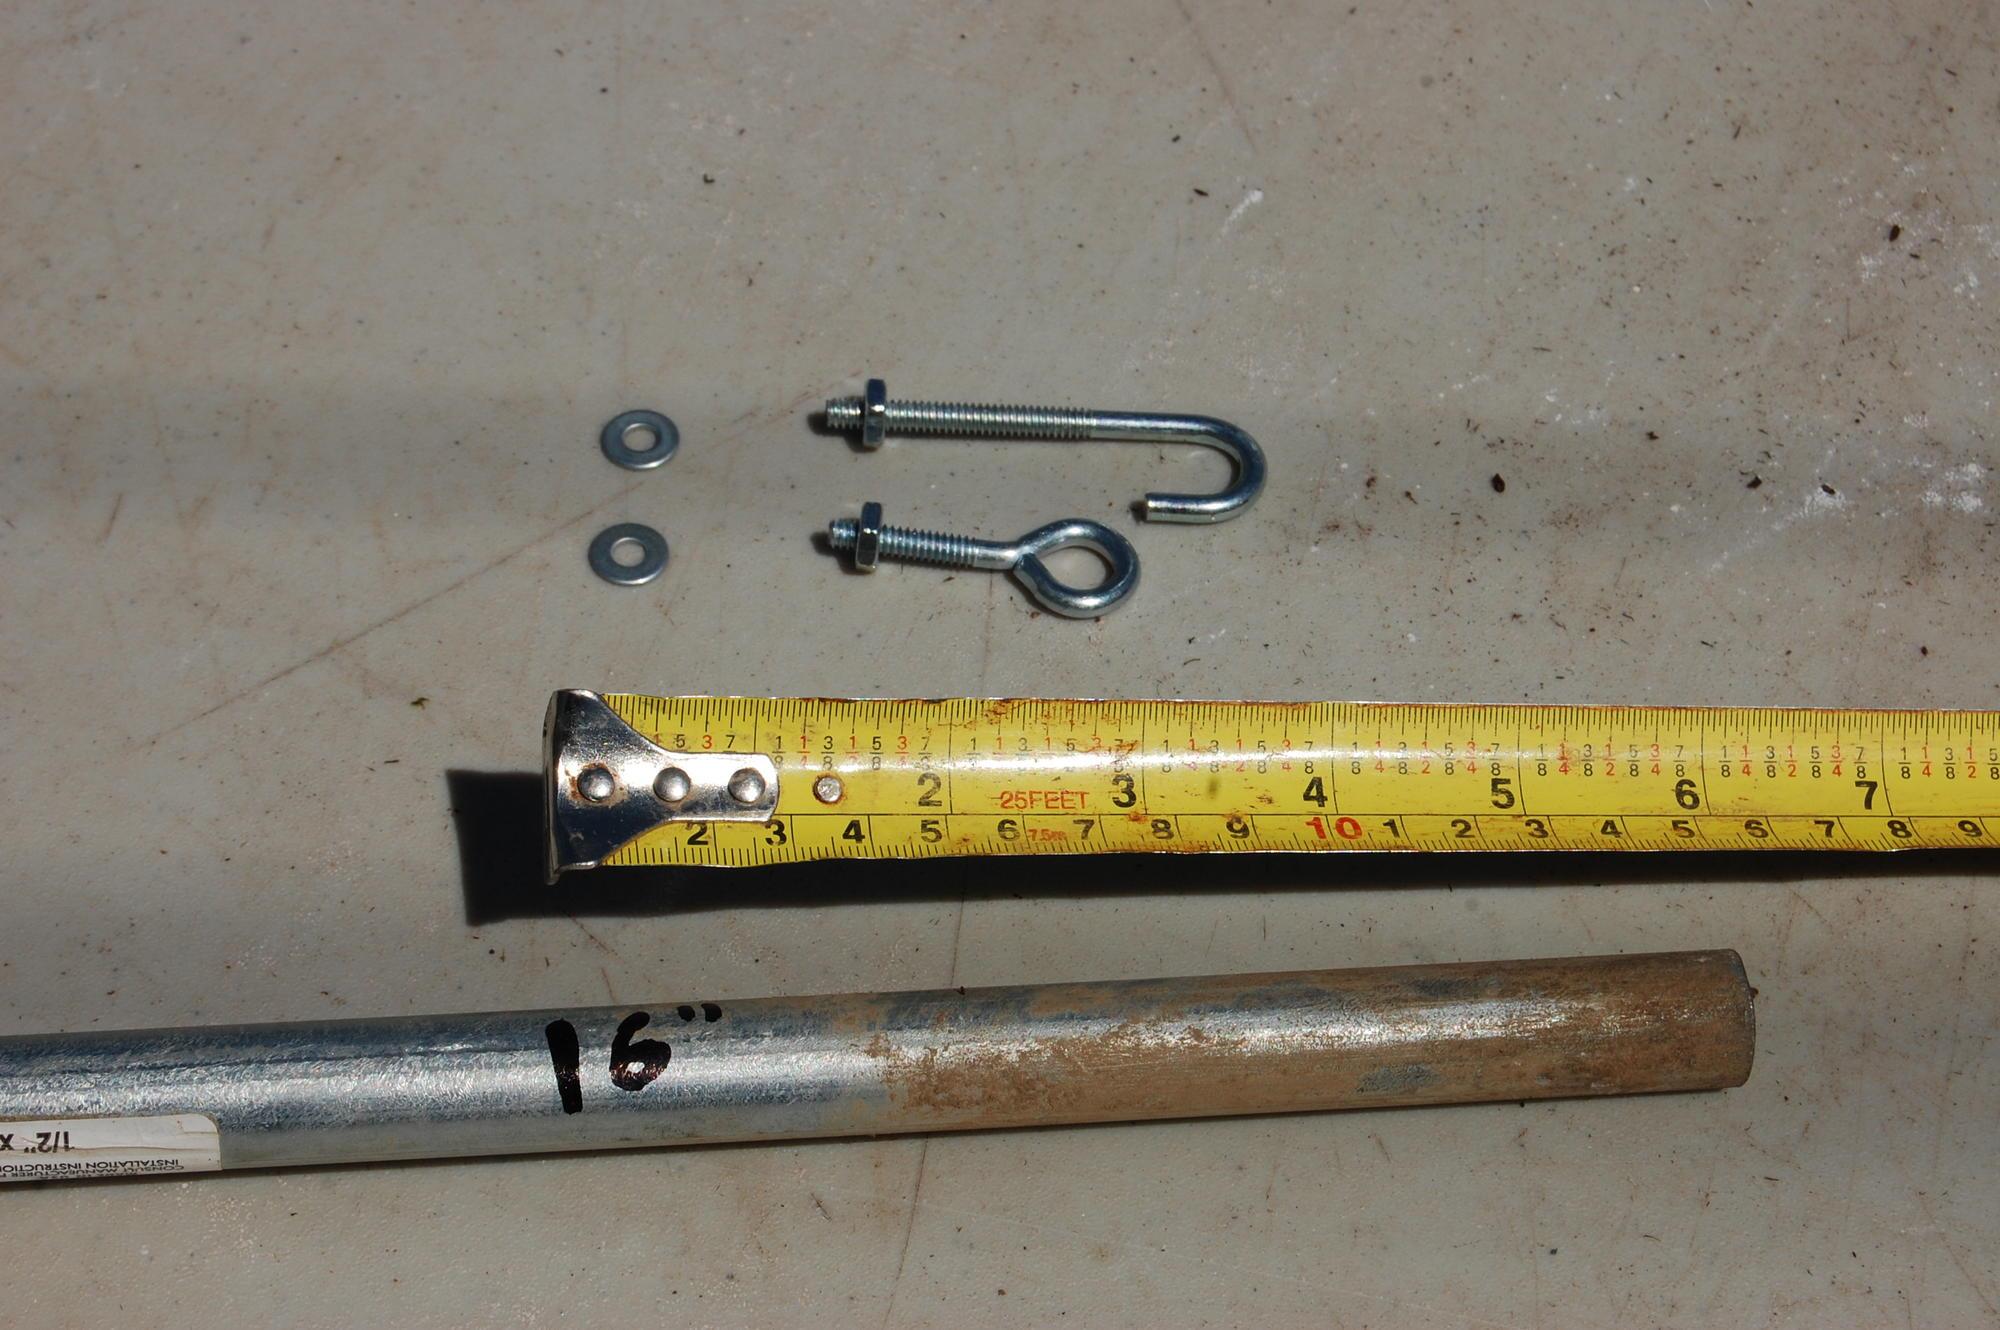 hook and eye closures next to measuring tape and a hoop end